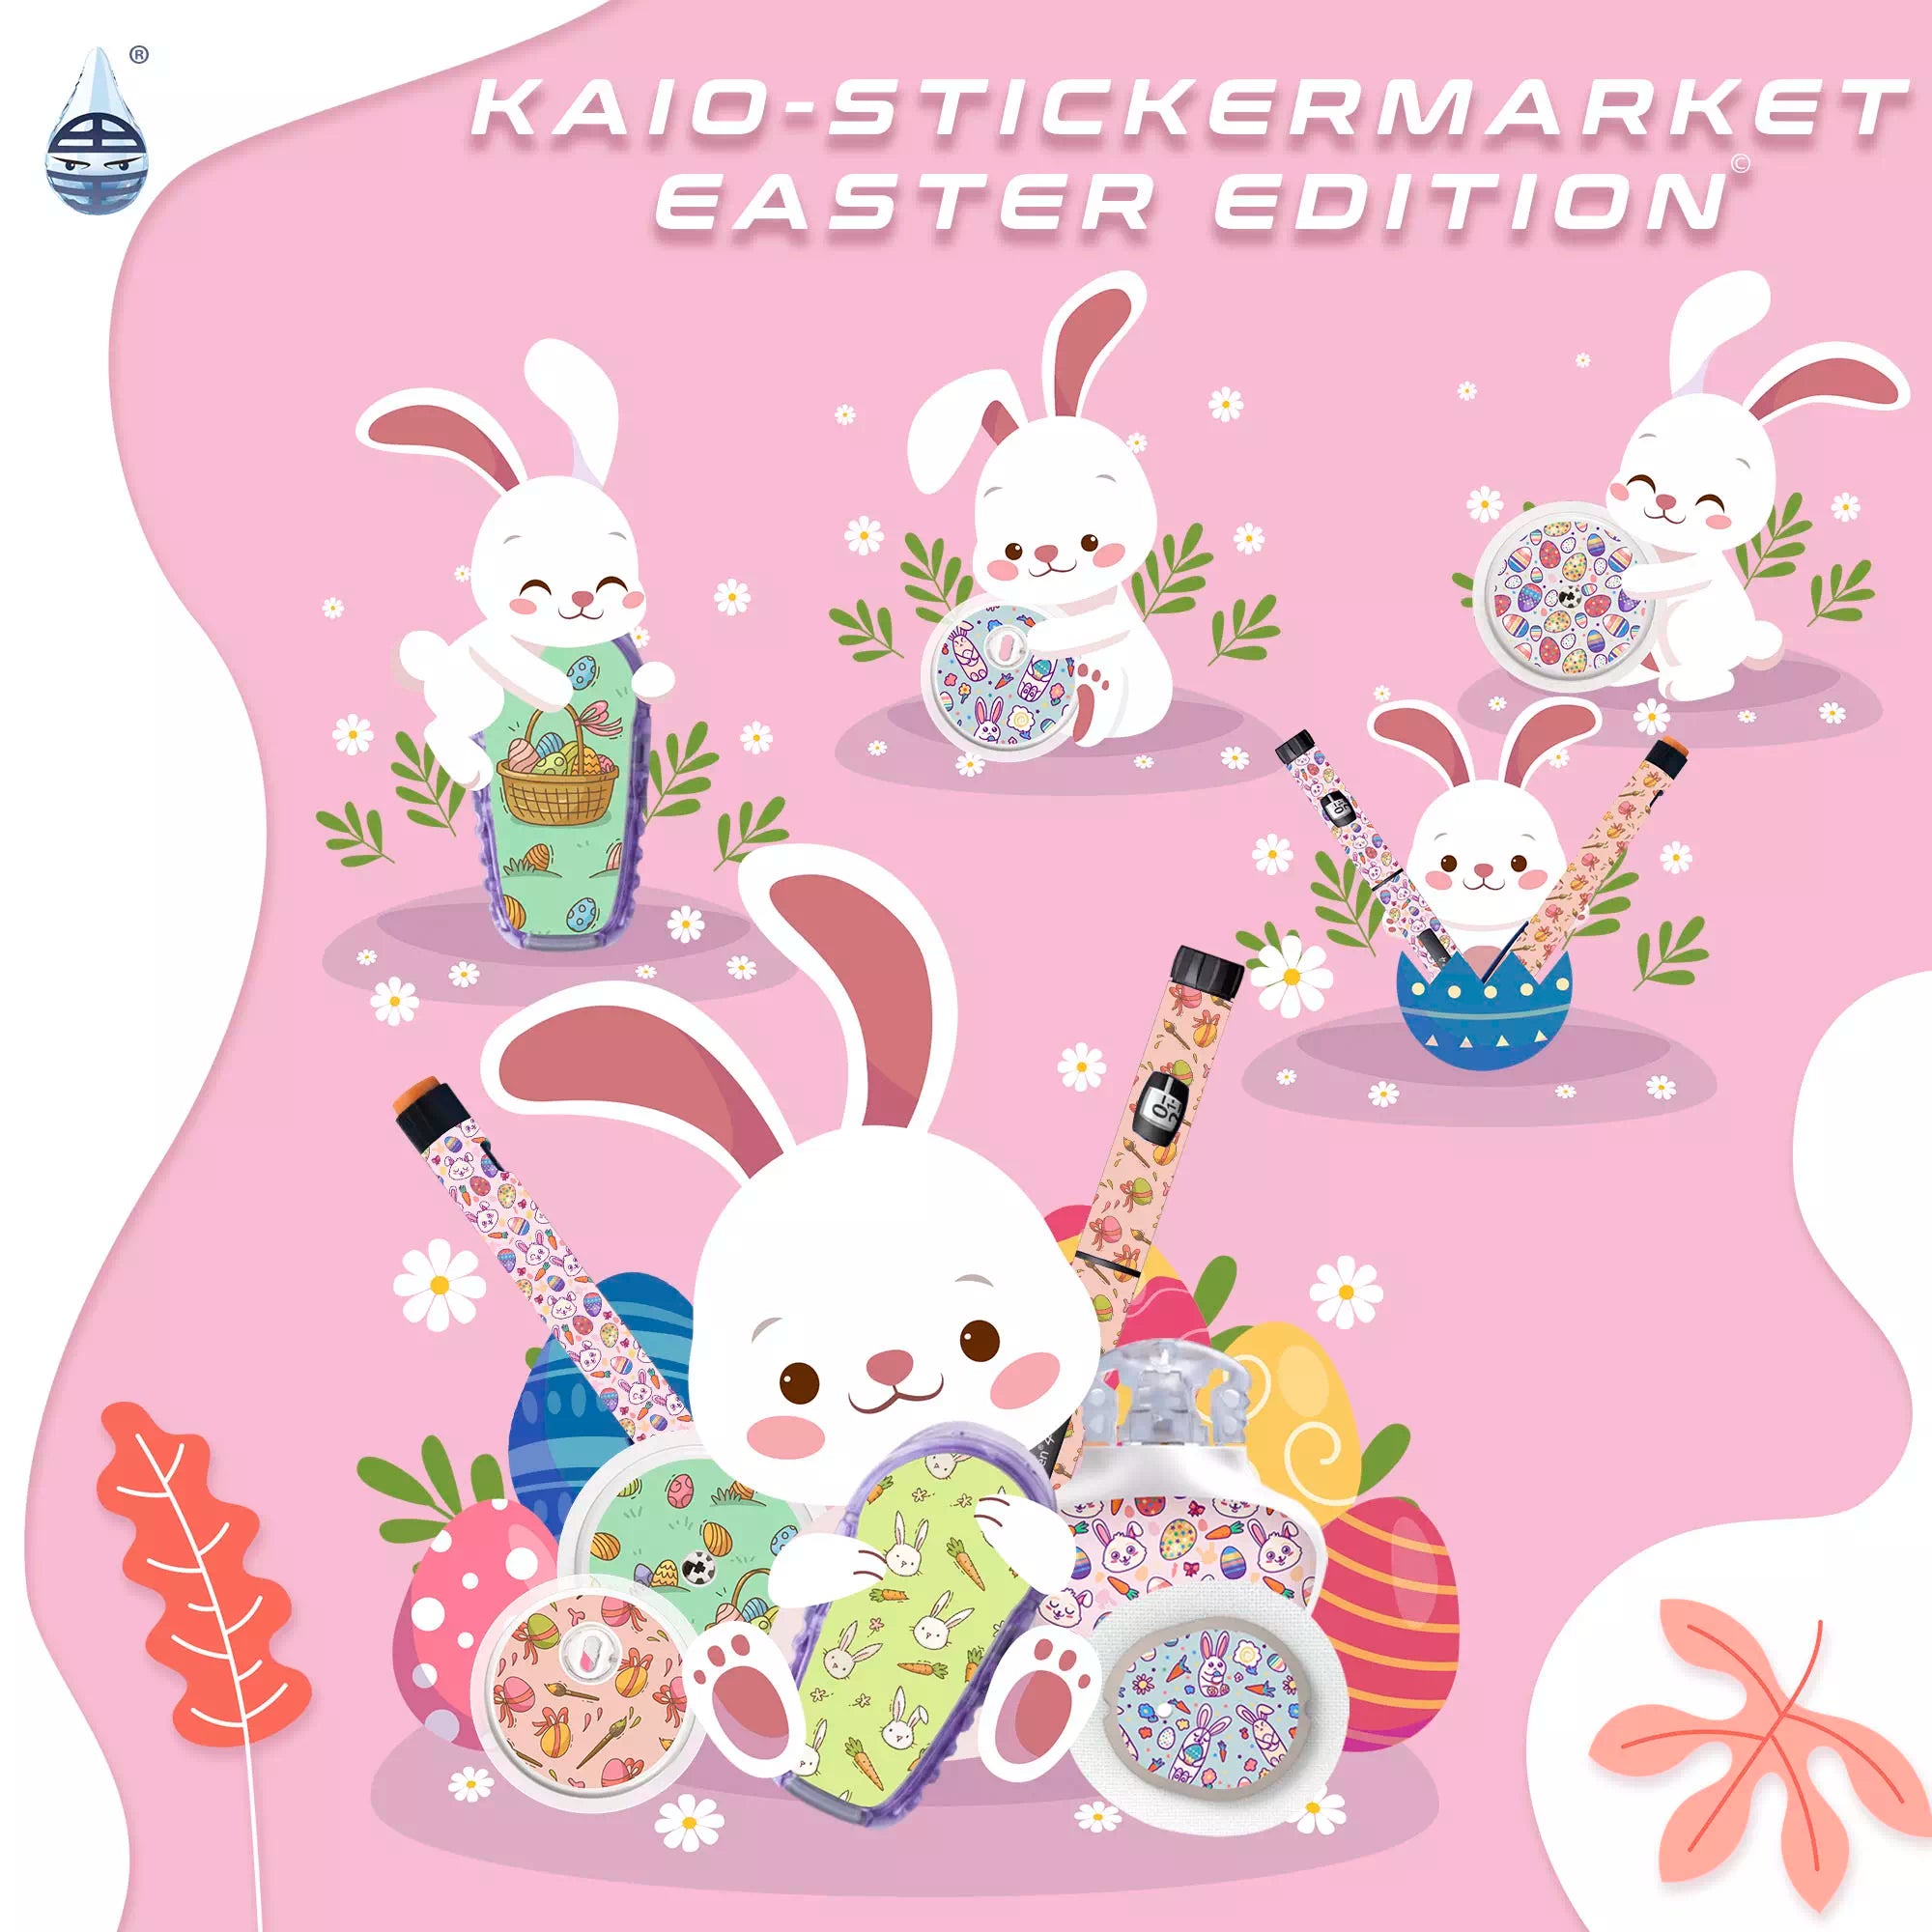 stickers-for-diabetic-devices-easter-collection-1.webp__PID:6f624eaa-ee9d-47c9-9612-ced4282d7f39